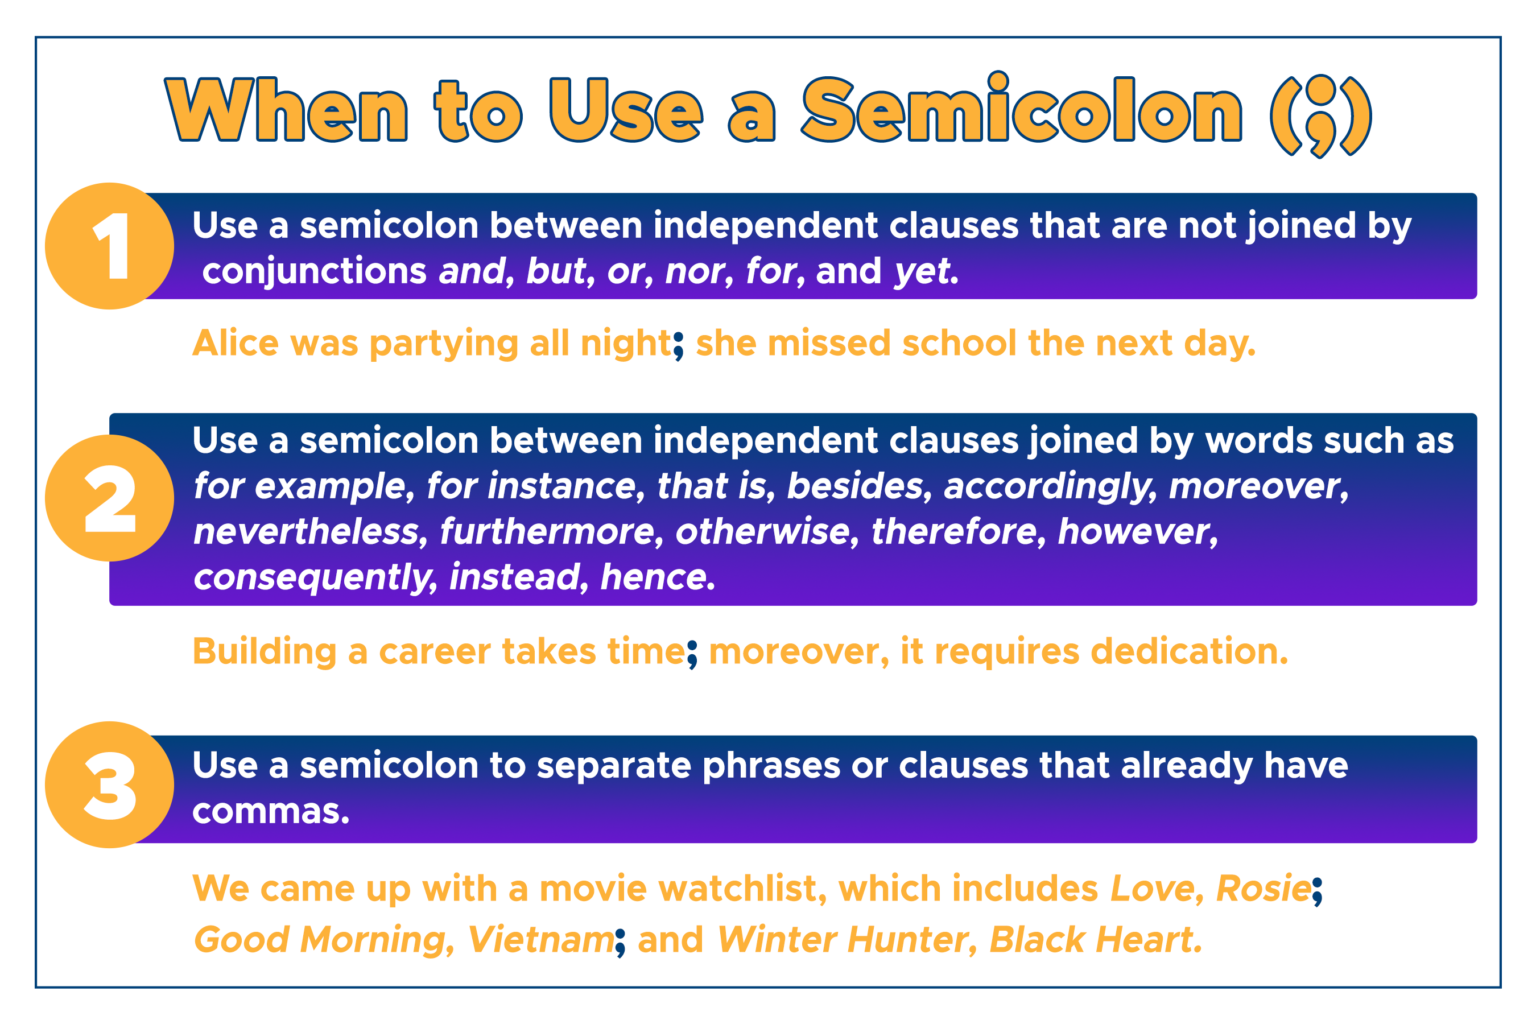 semicolons-and-commas-to-separate-clauses-youtube